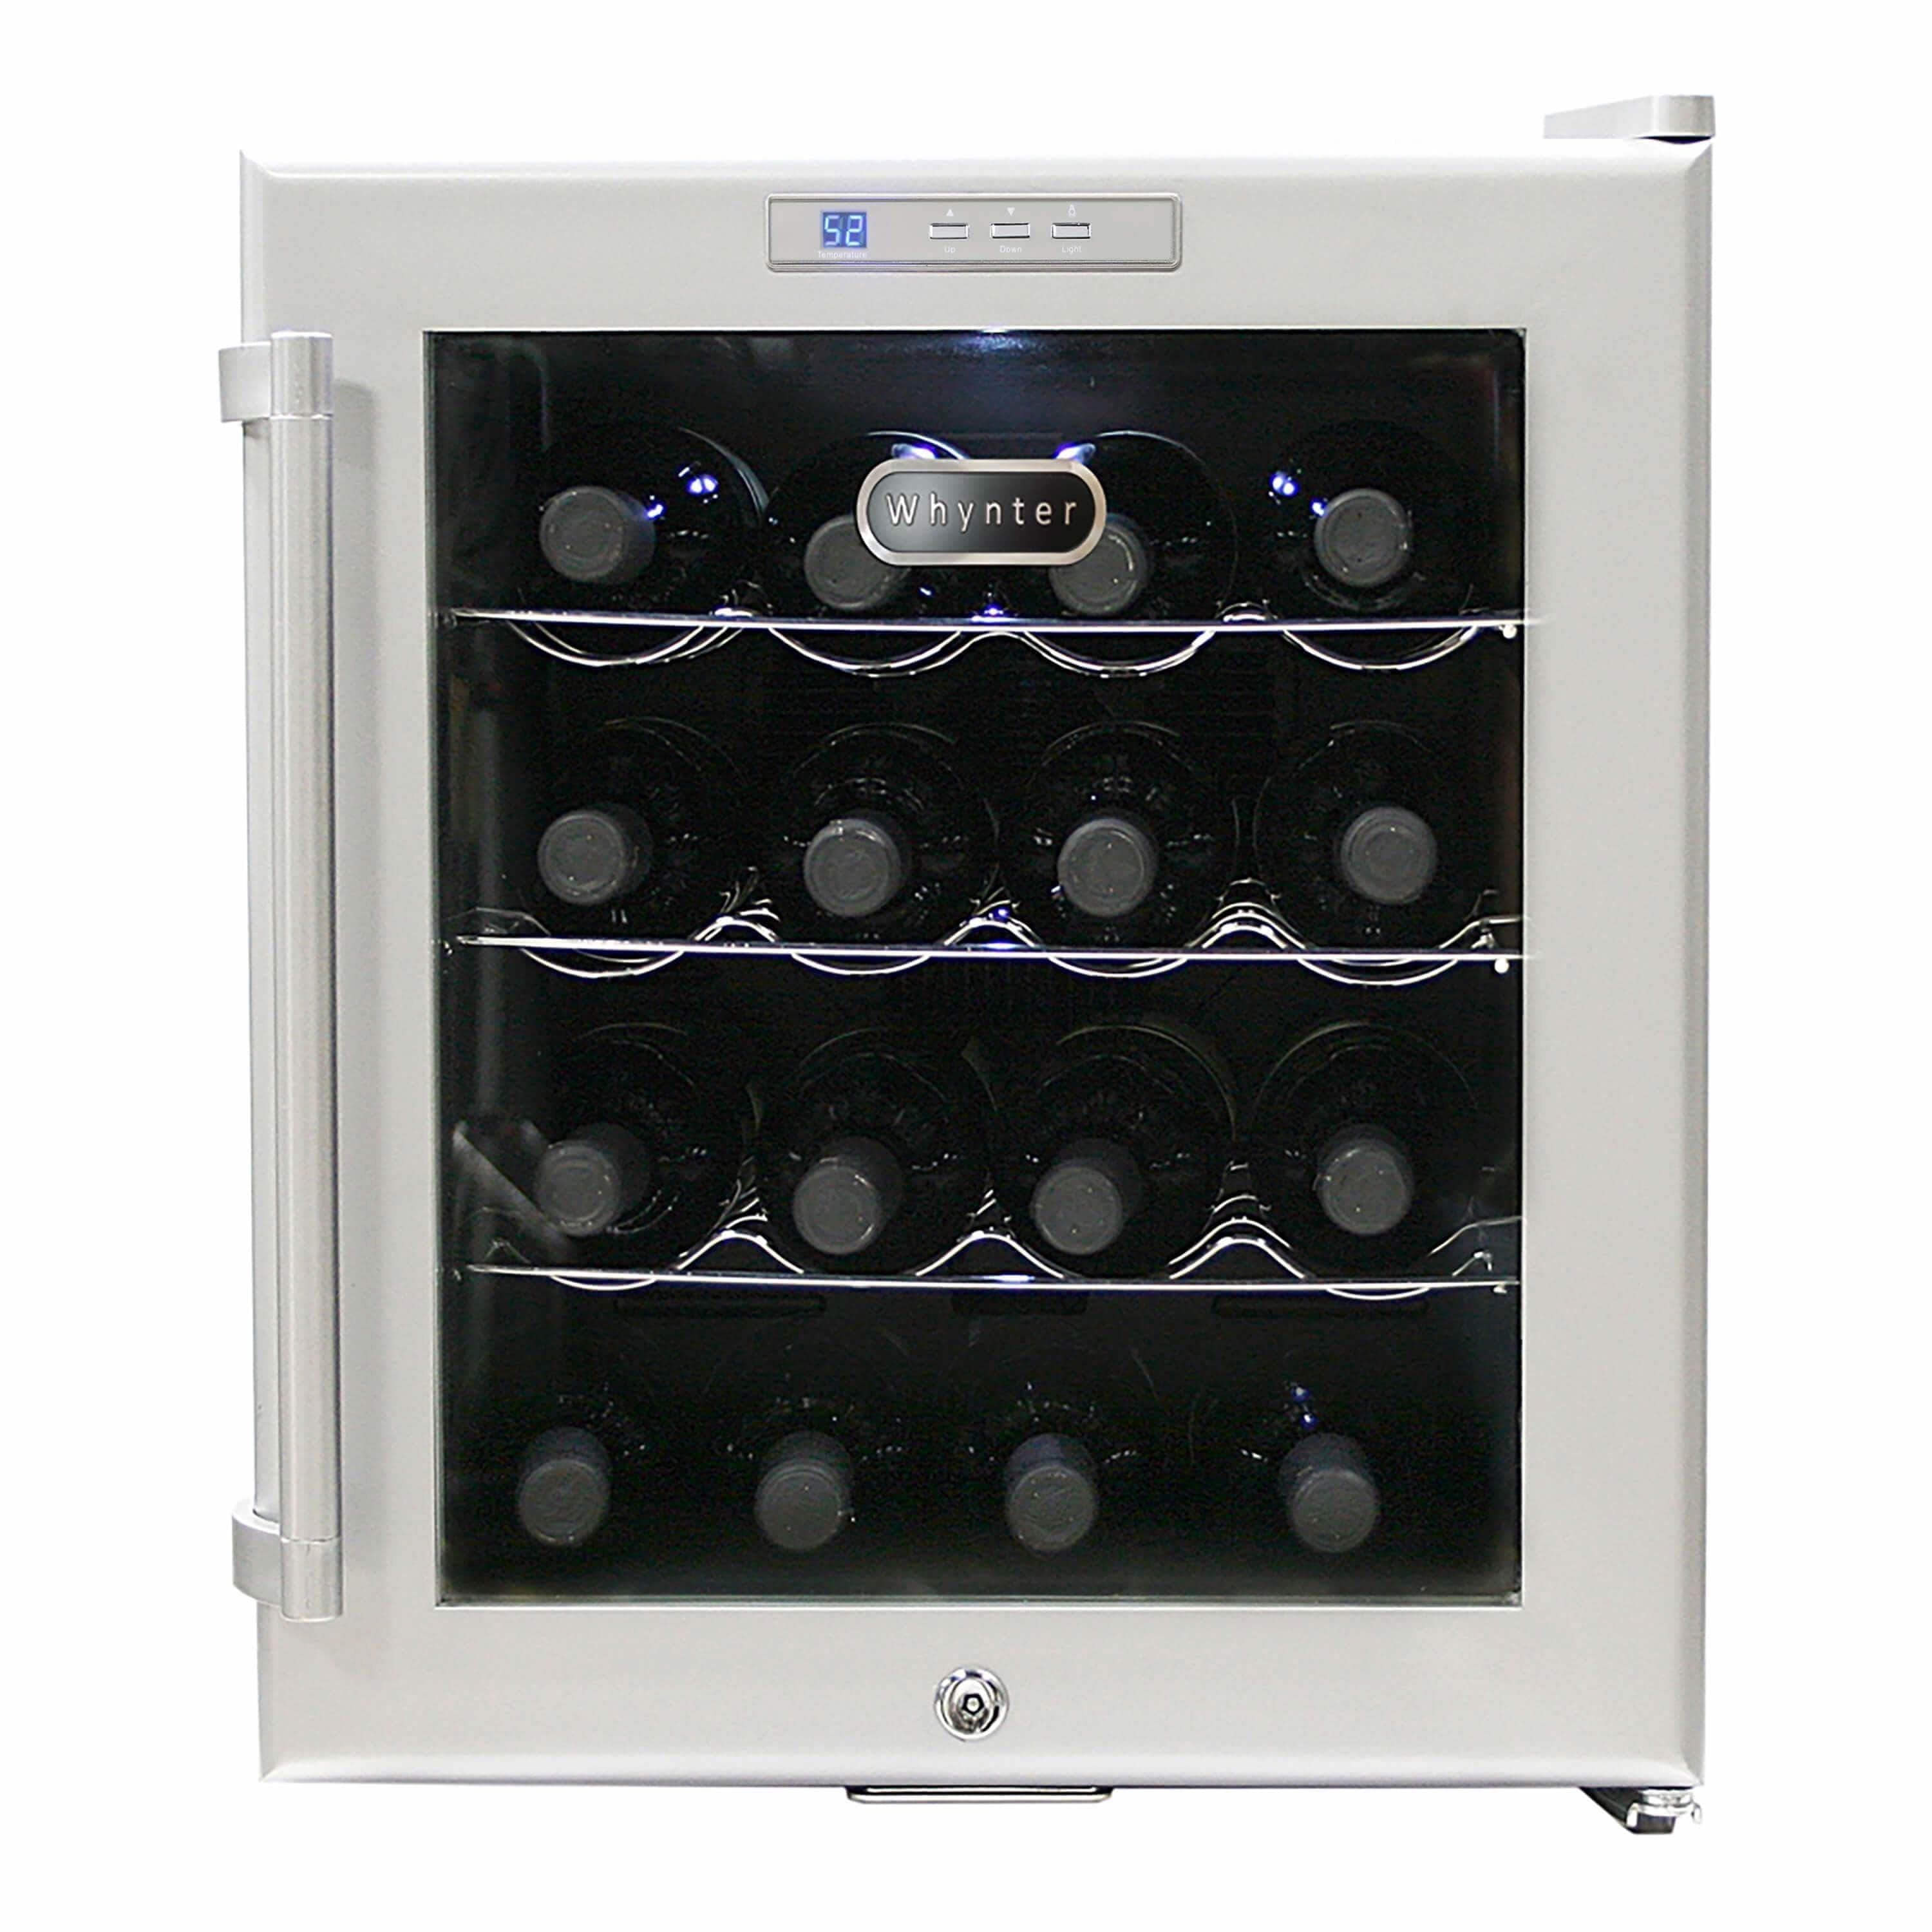 Whynter SNO 16 Bottles Wine Cooler - Platinum with lock  WC-16S Wine Coolers WC-16S Luxury Appliances Direct